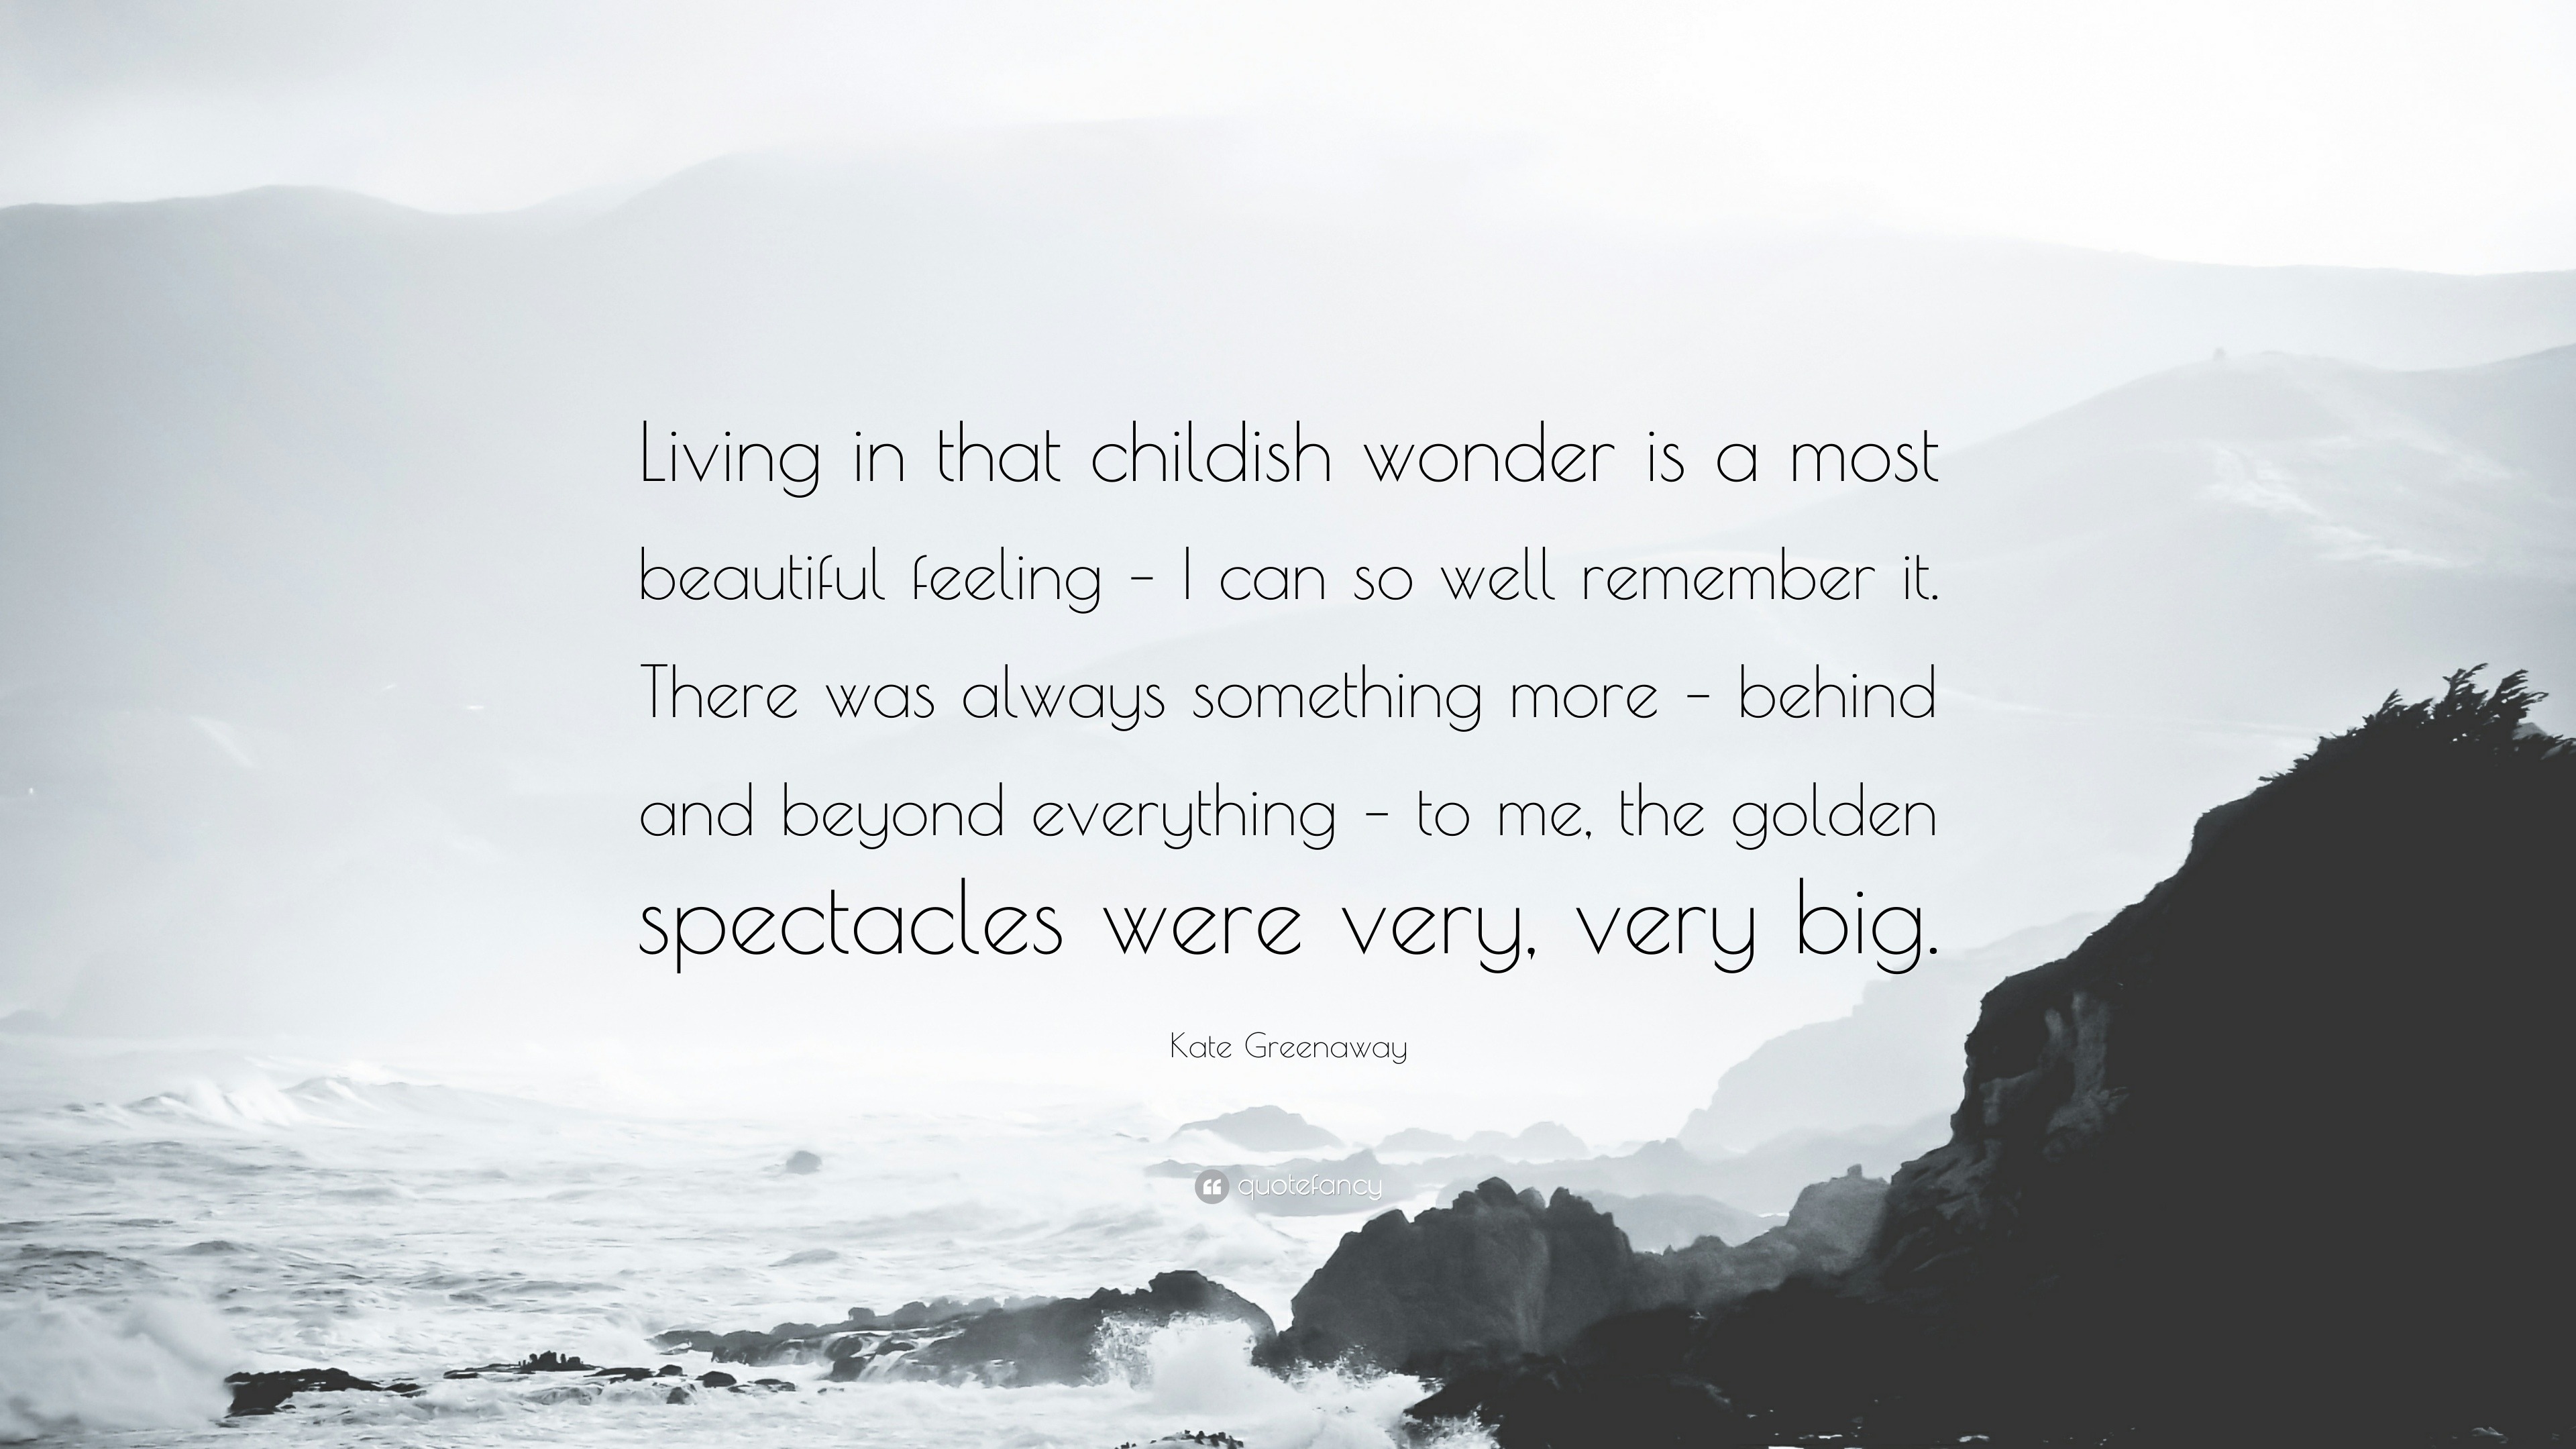 Kate Greenaway Quote “Living in that childish wonder is a most beautiful feeling –